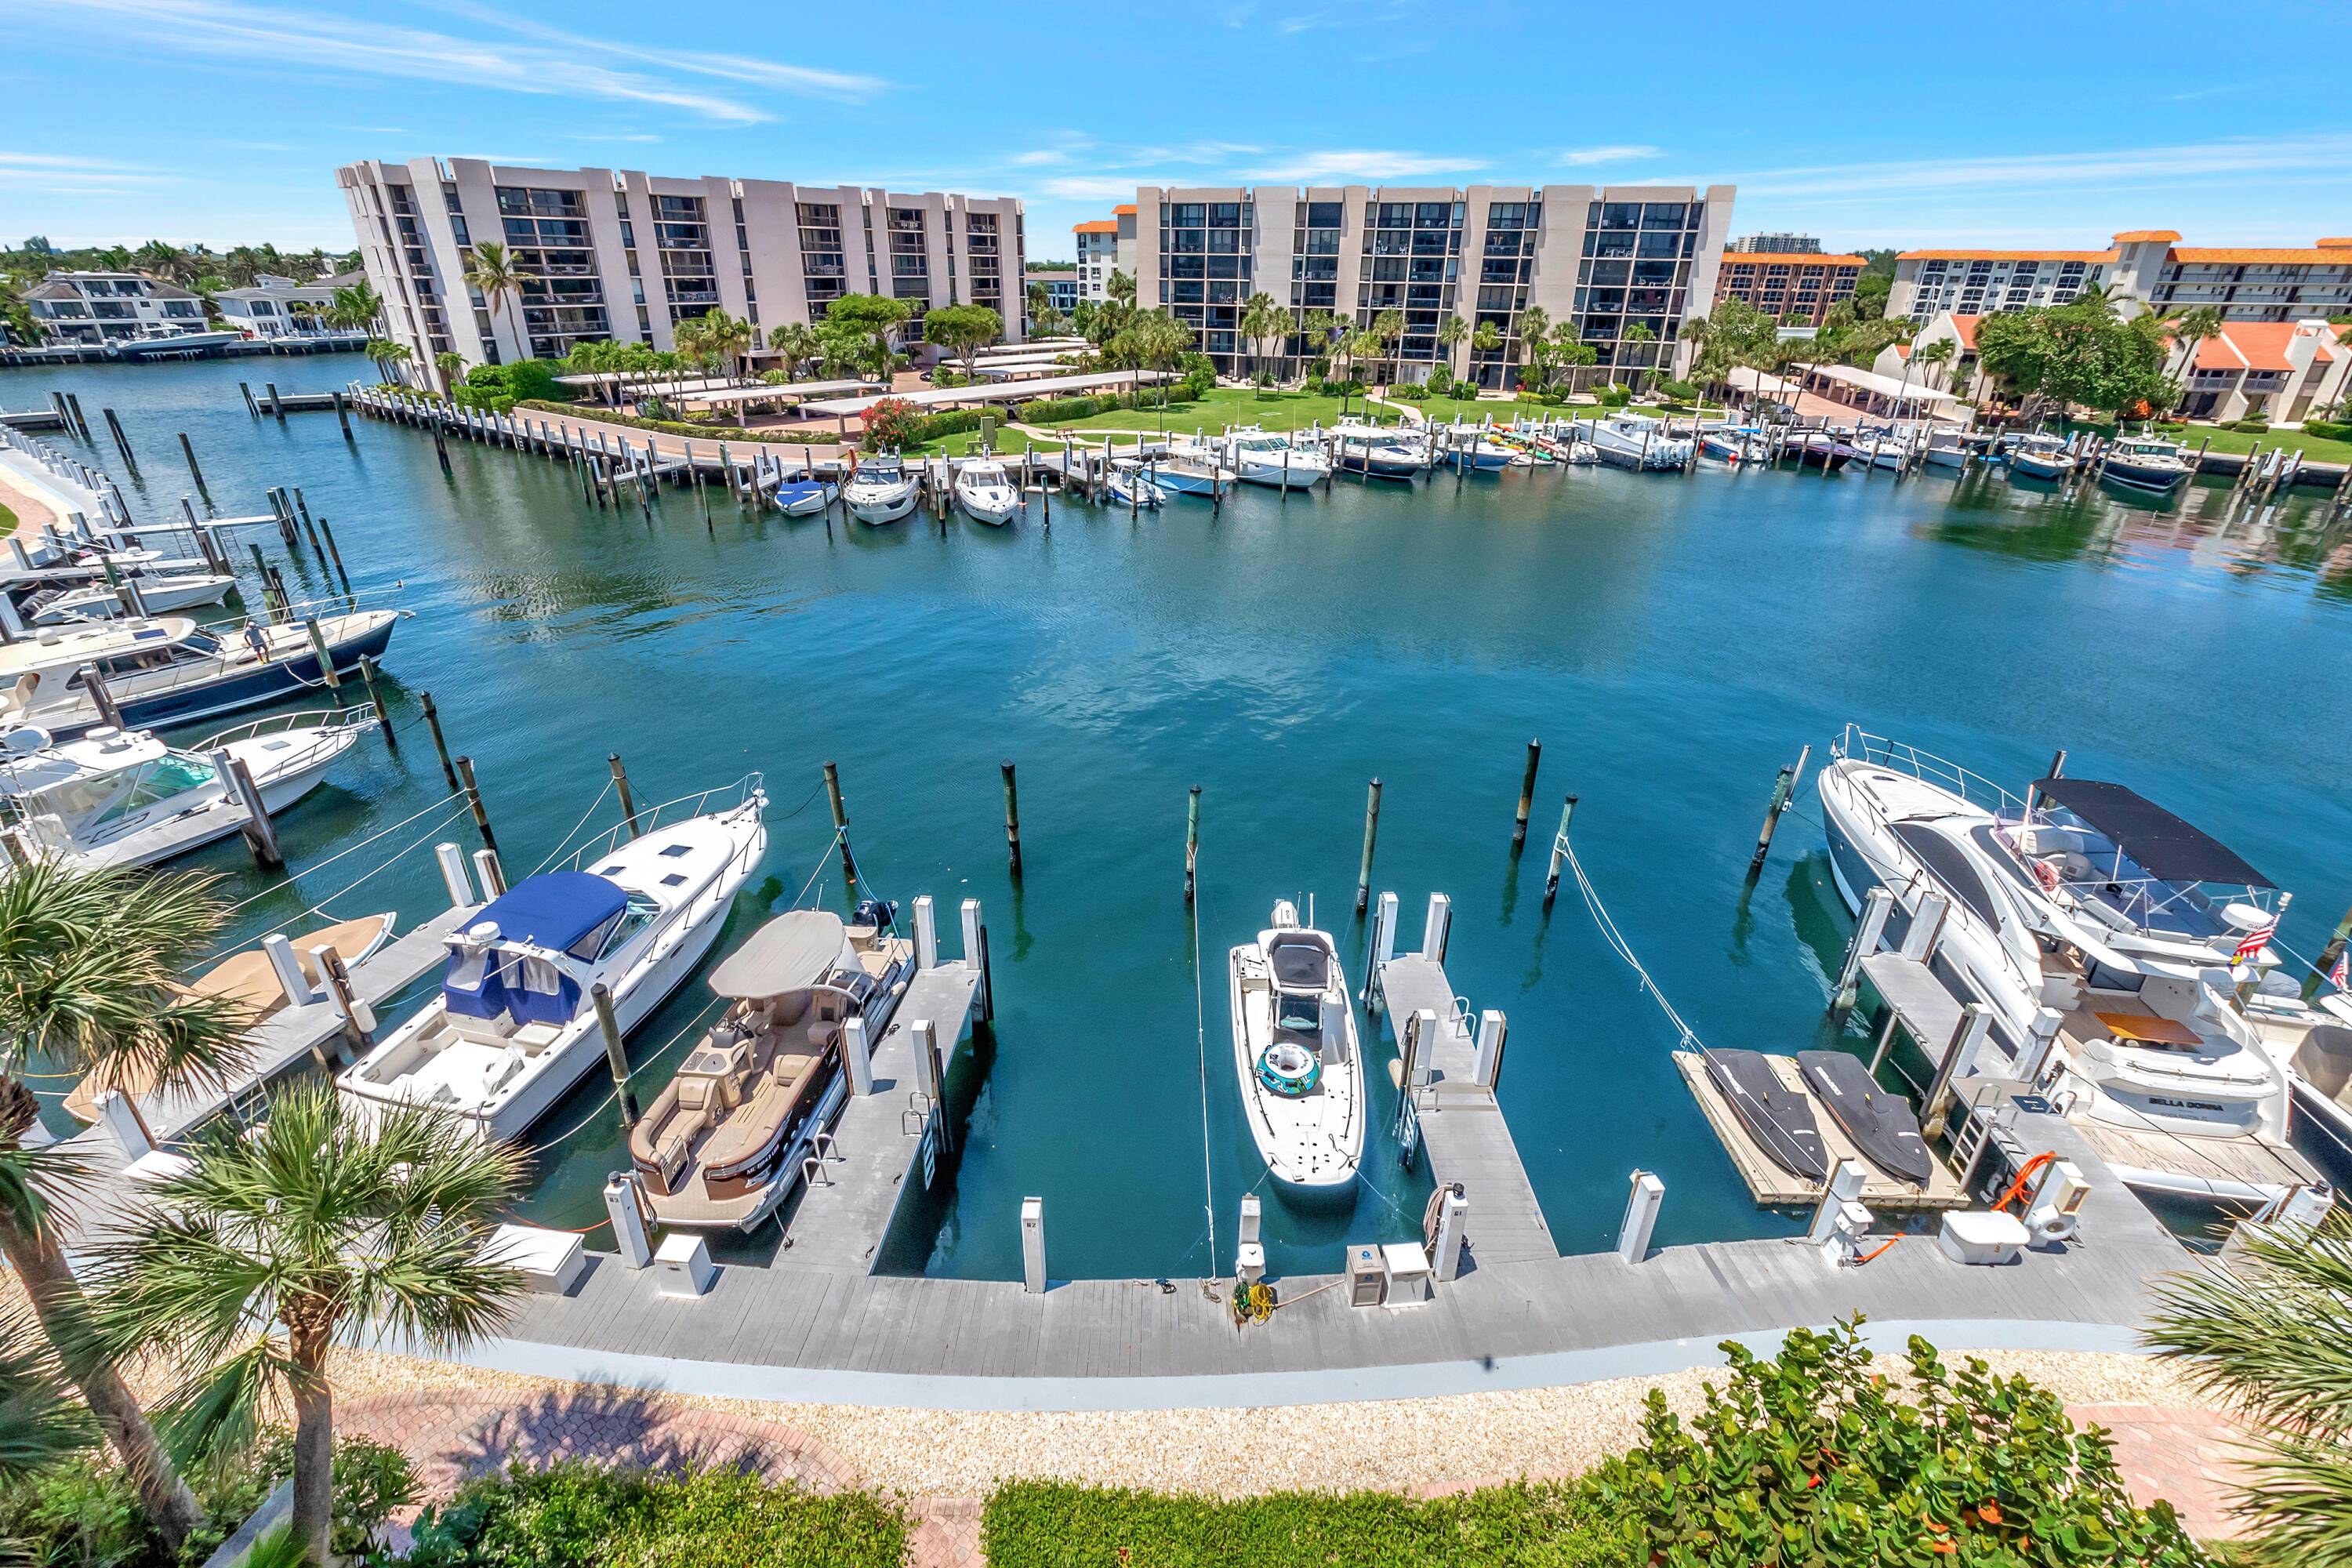 MAGNIFICENT VIEWS OF THE YACHTS, MARINA AND INTRACOASTAL OCEAN VIEW SPLIT CORNER 2 BEDROOM 2 BATH CONDO WITH 1, 215 SQ.